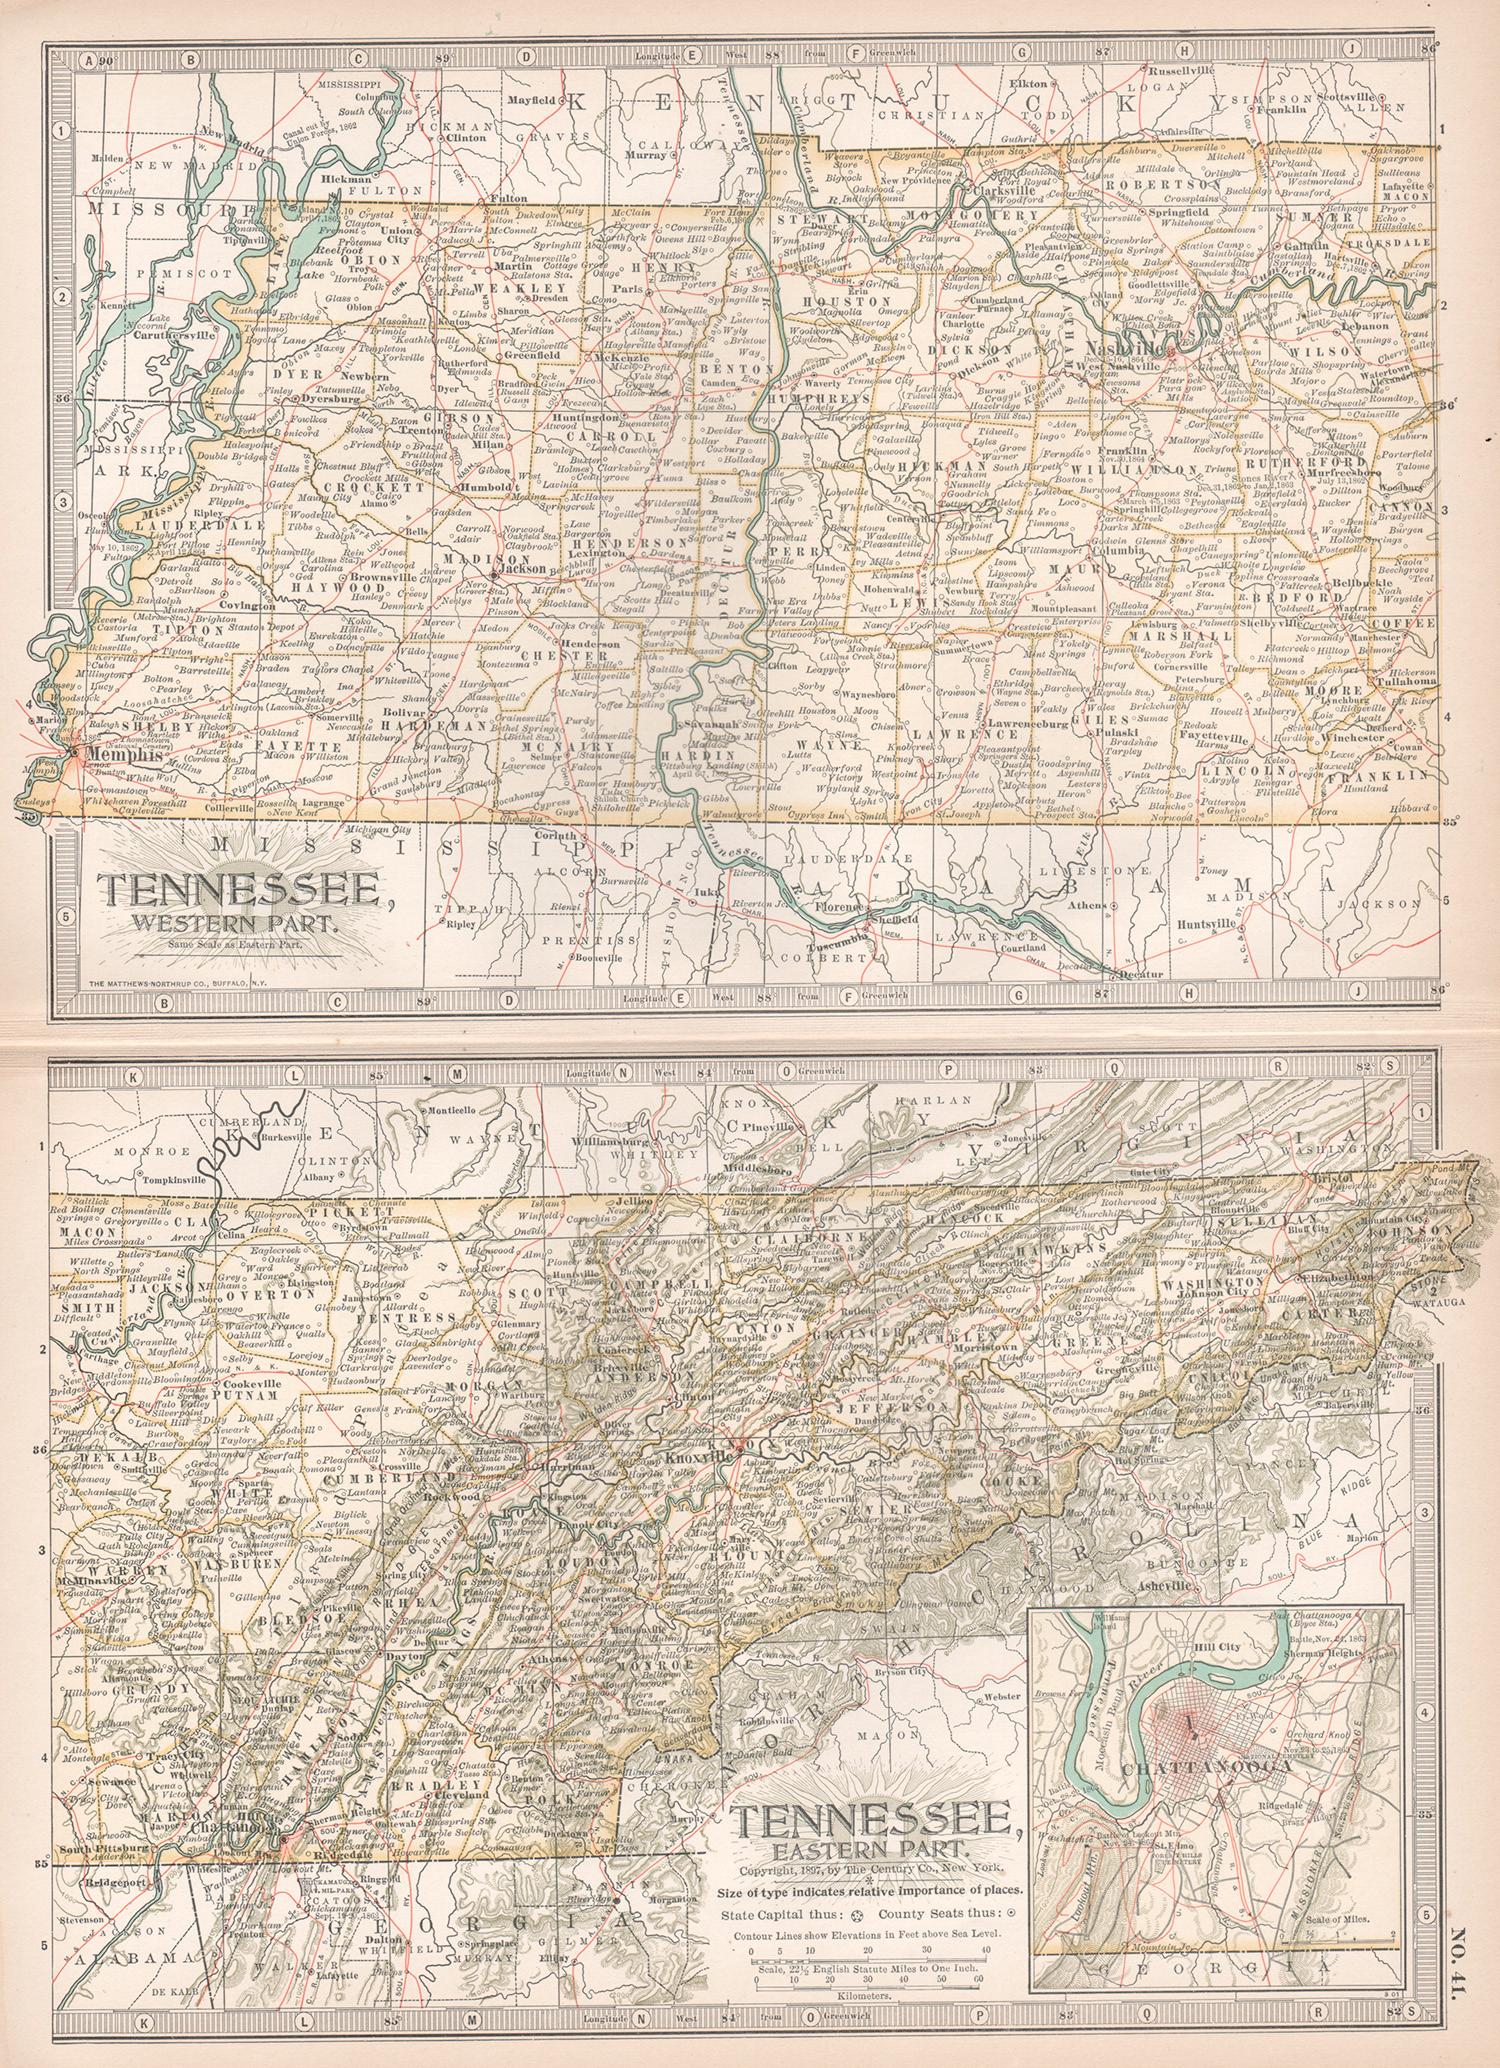 Tennessee. USA Century Atlas state antique vintage map